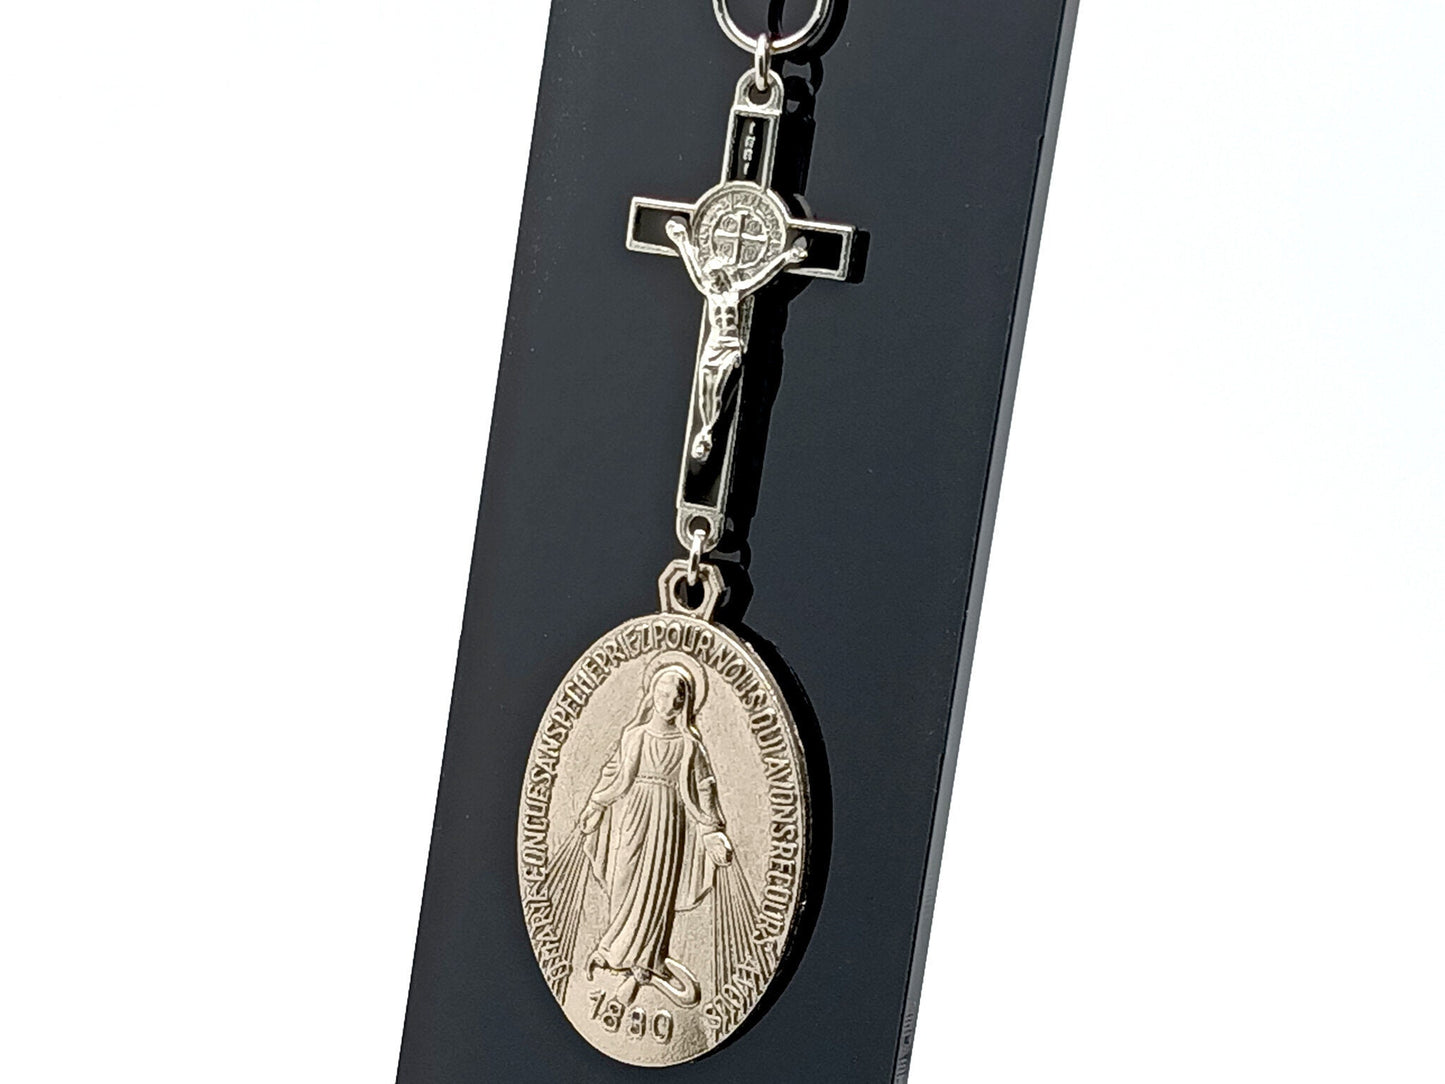 Miraculous medal unique rosary beads key fob with linking Saint Benedict crucifix and stainless steel clasp.